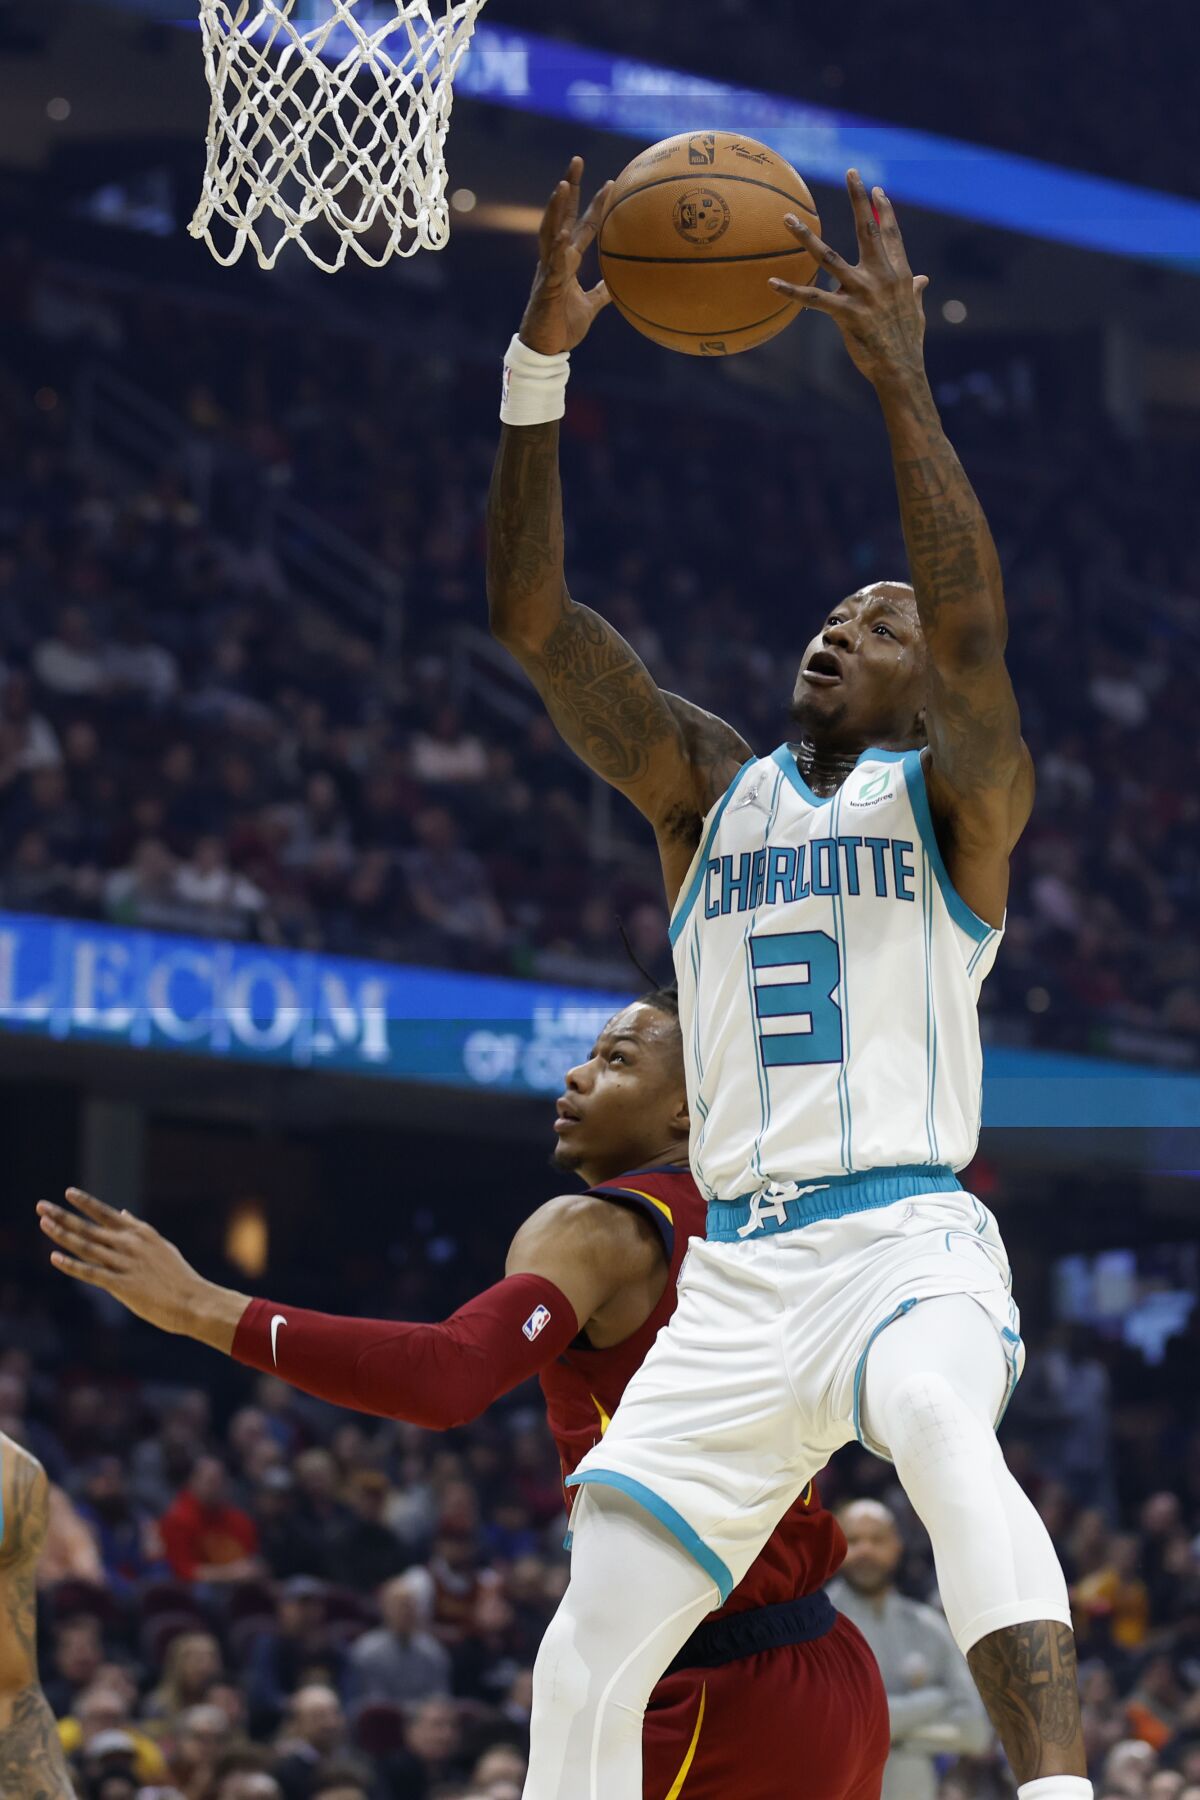 Charlotte Hornets' Terry Rozier (3) grabs a rebound against Cleveland Cavaliers' Isaac Okoro (35) during the first half of an NBA basketball game, Wednesday, March 2, 2022, in Cleveland. (AP Photo/Ron Schwane)